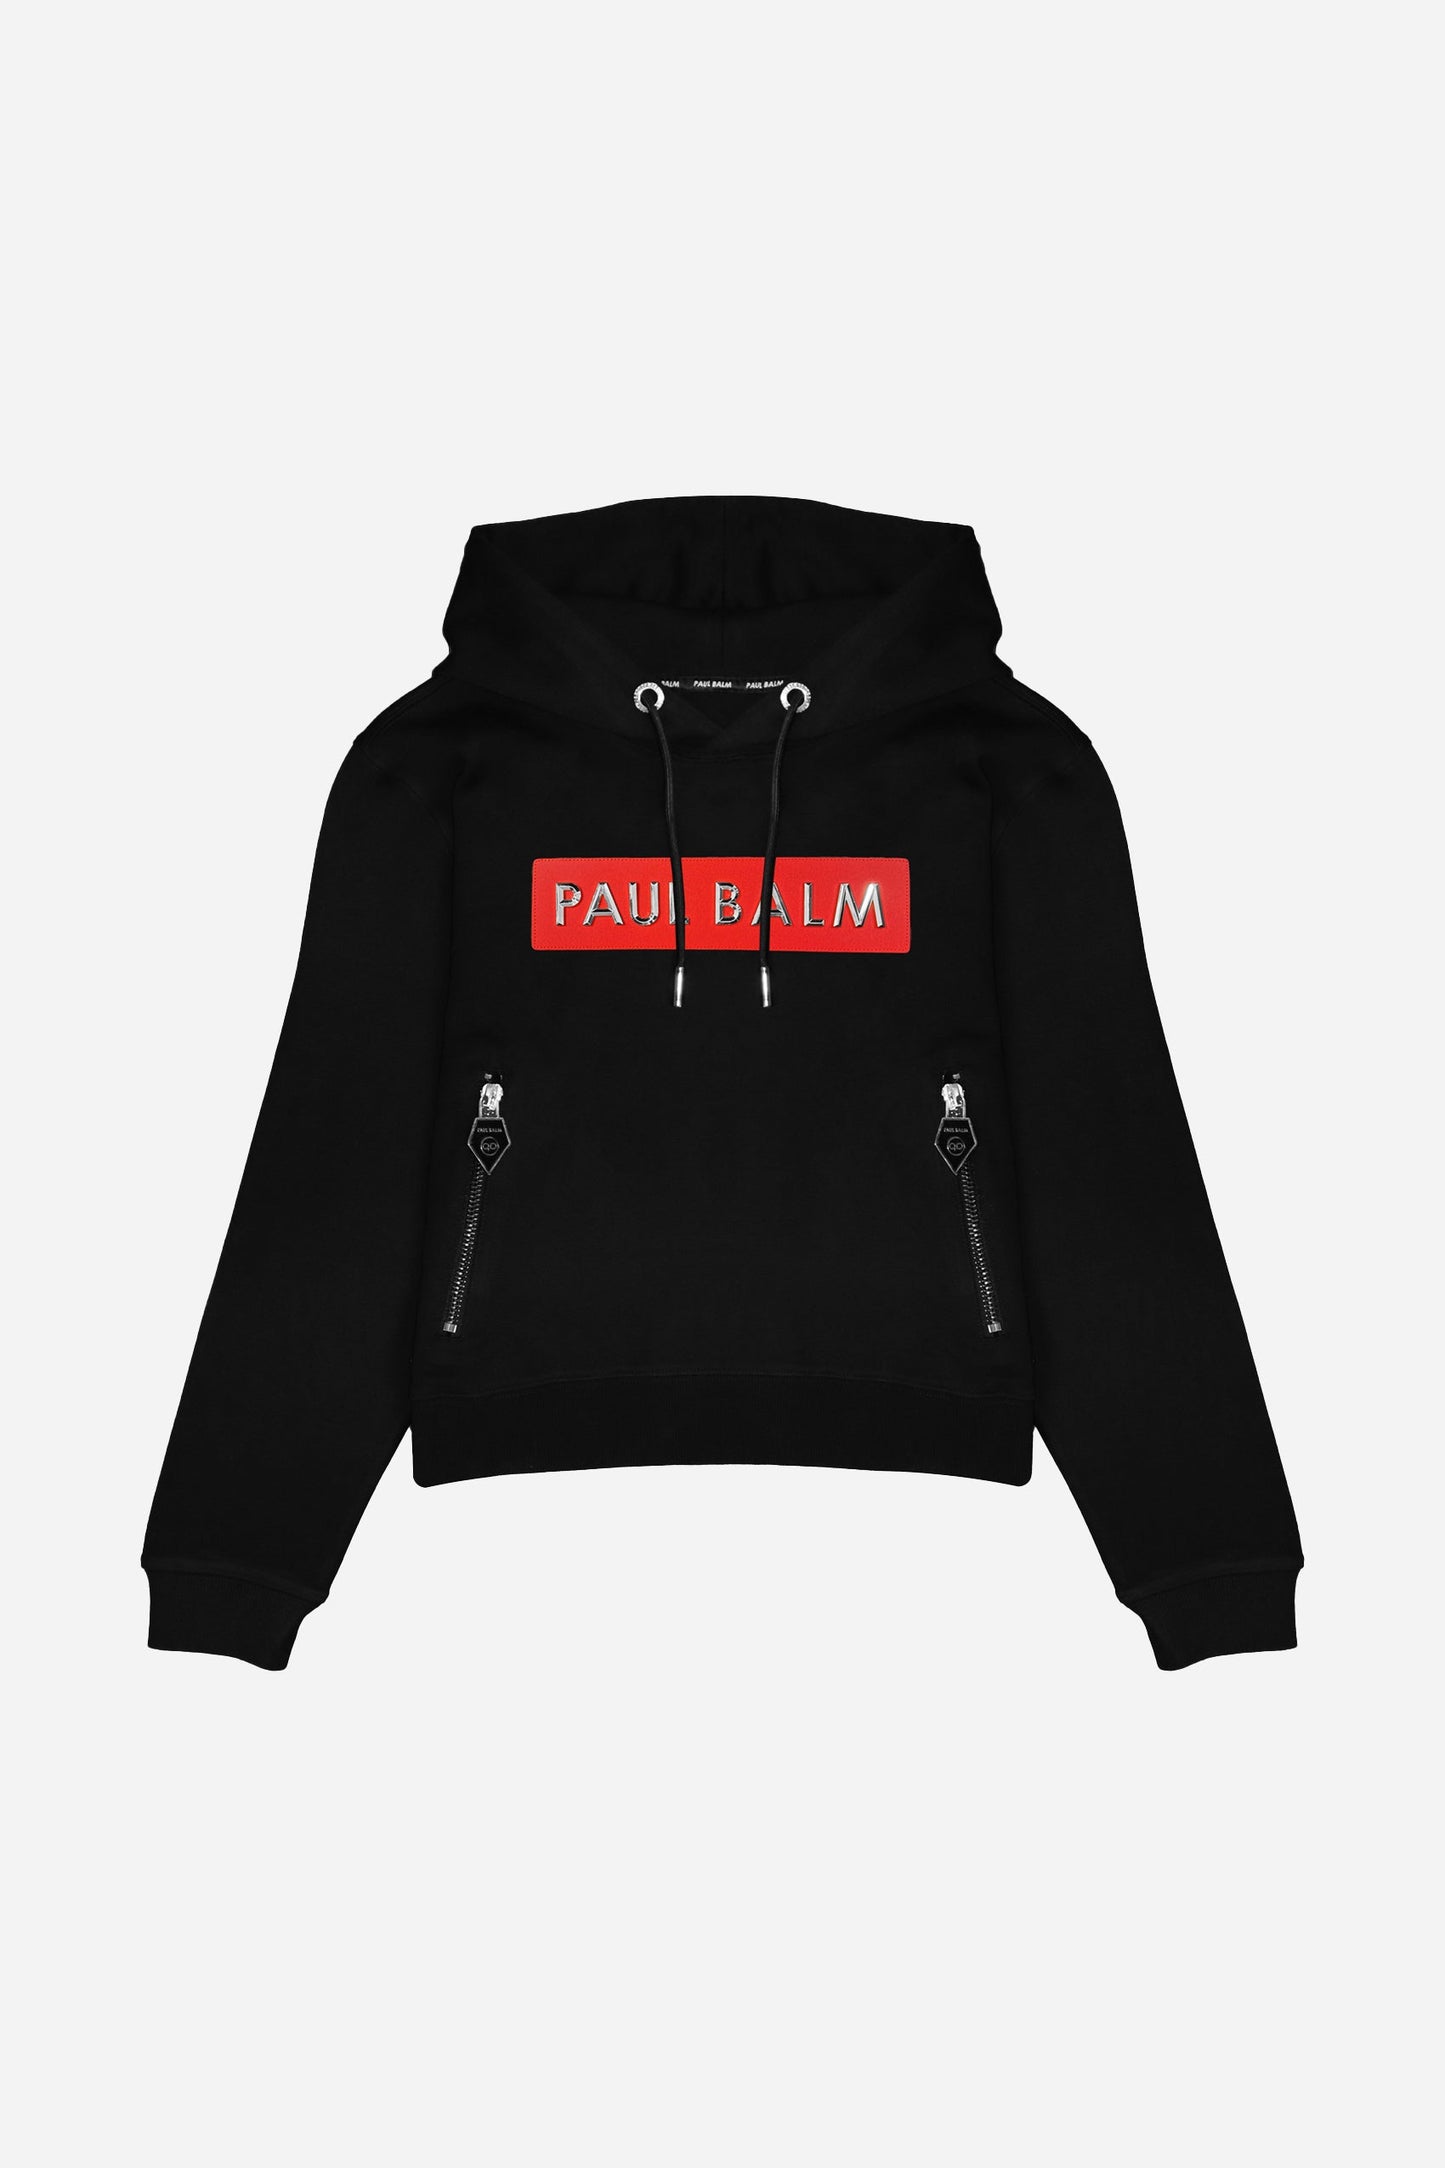 PAUL BALM Metal Patch silver/red Hoodie